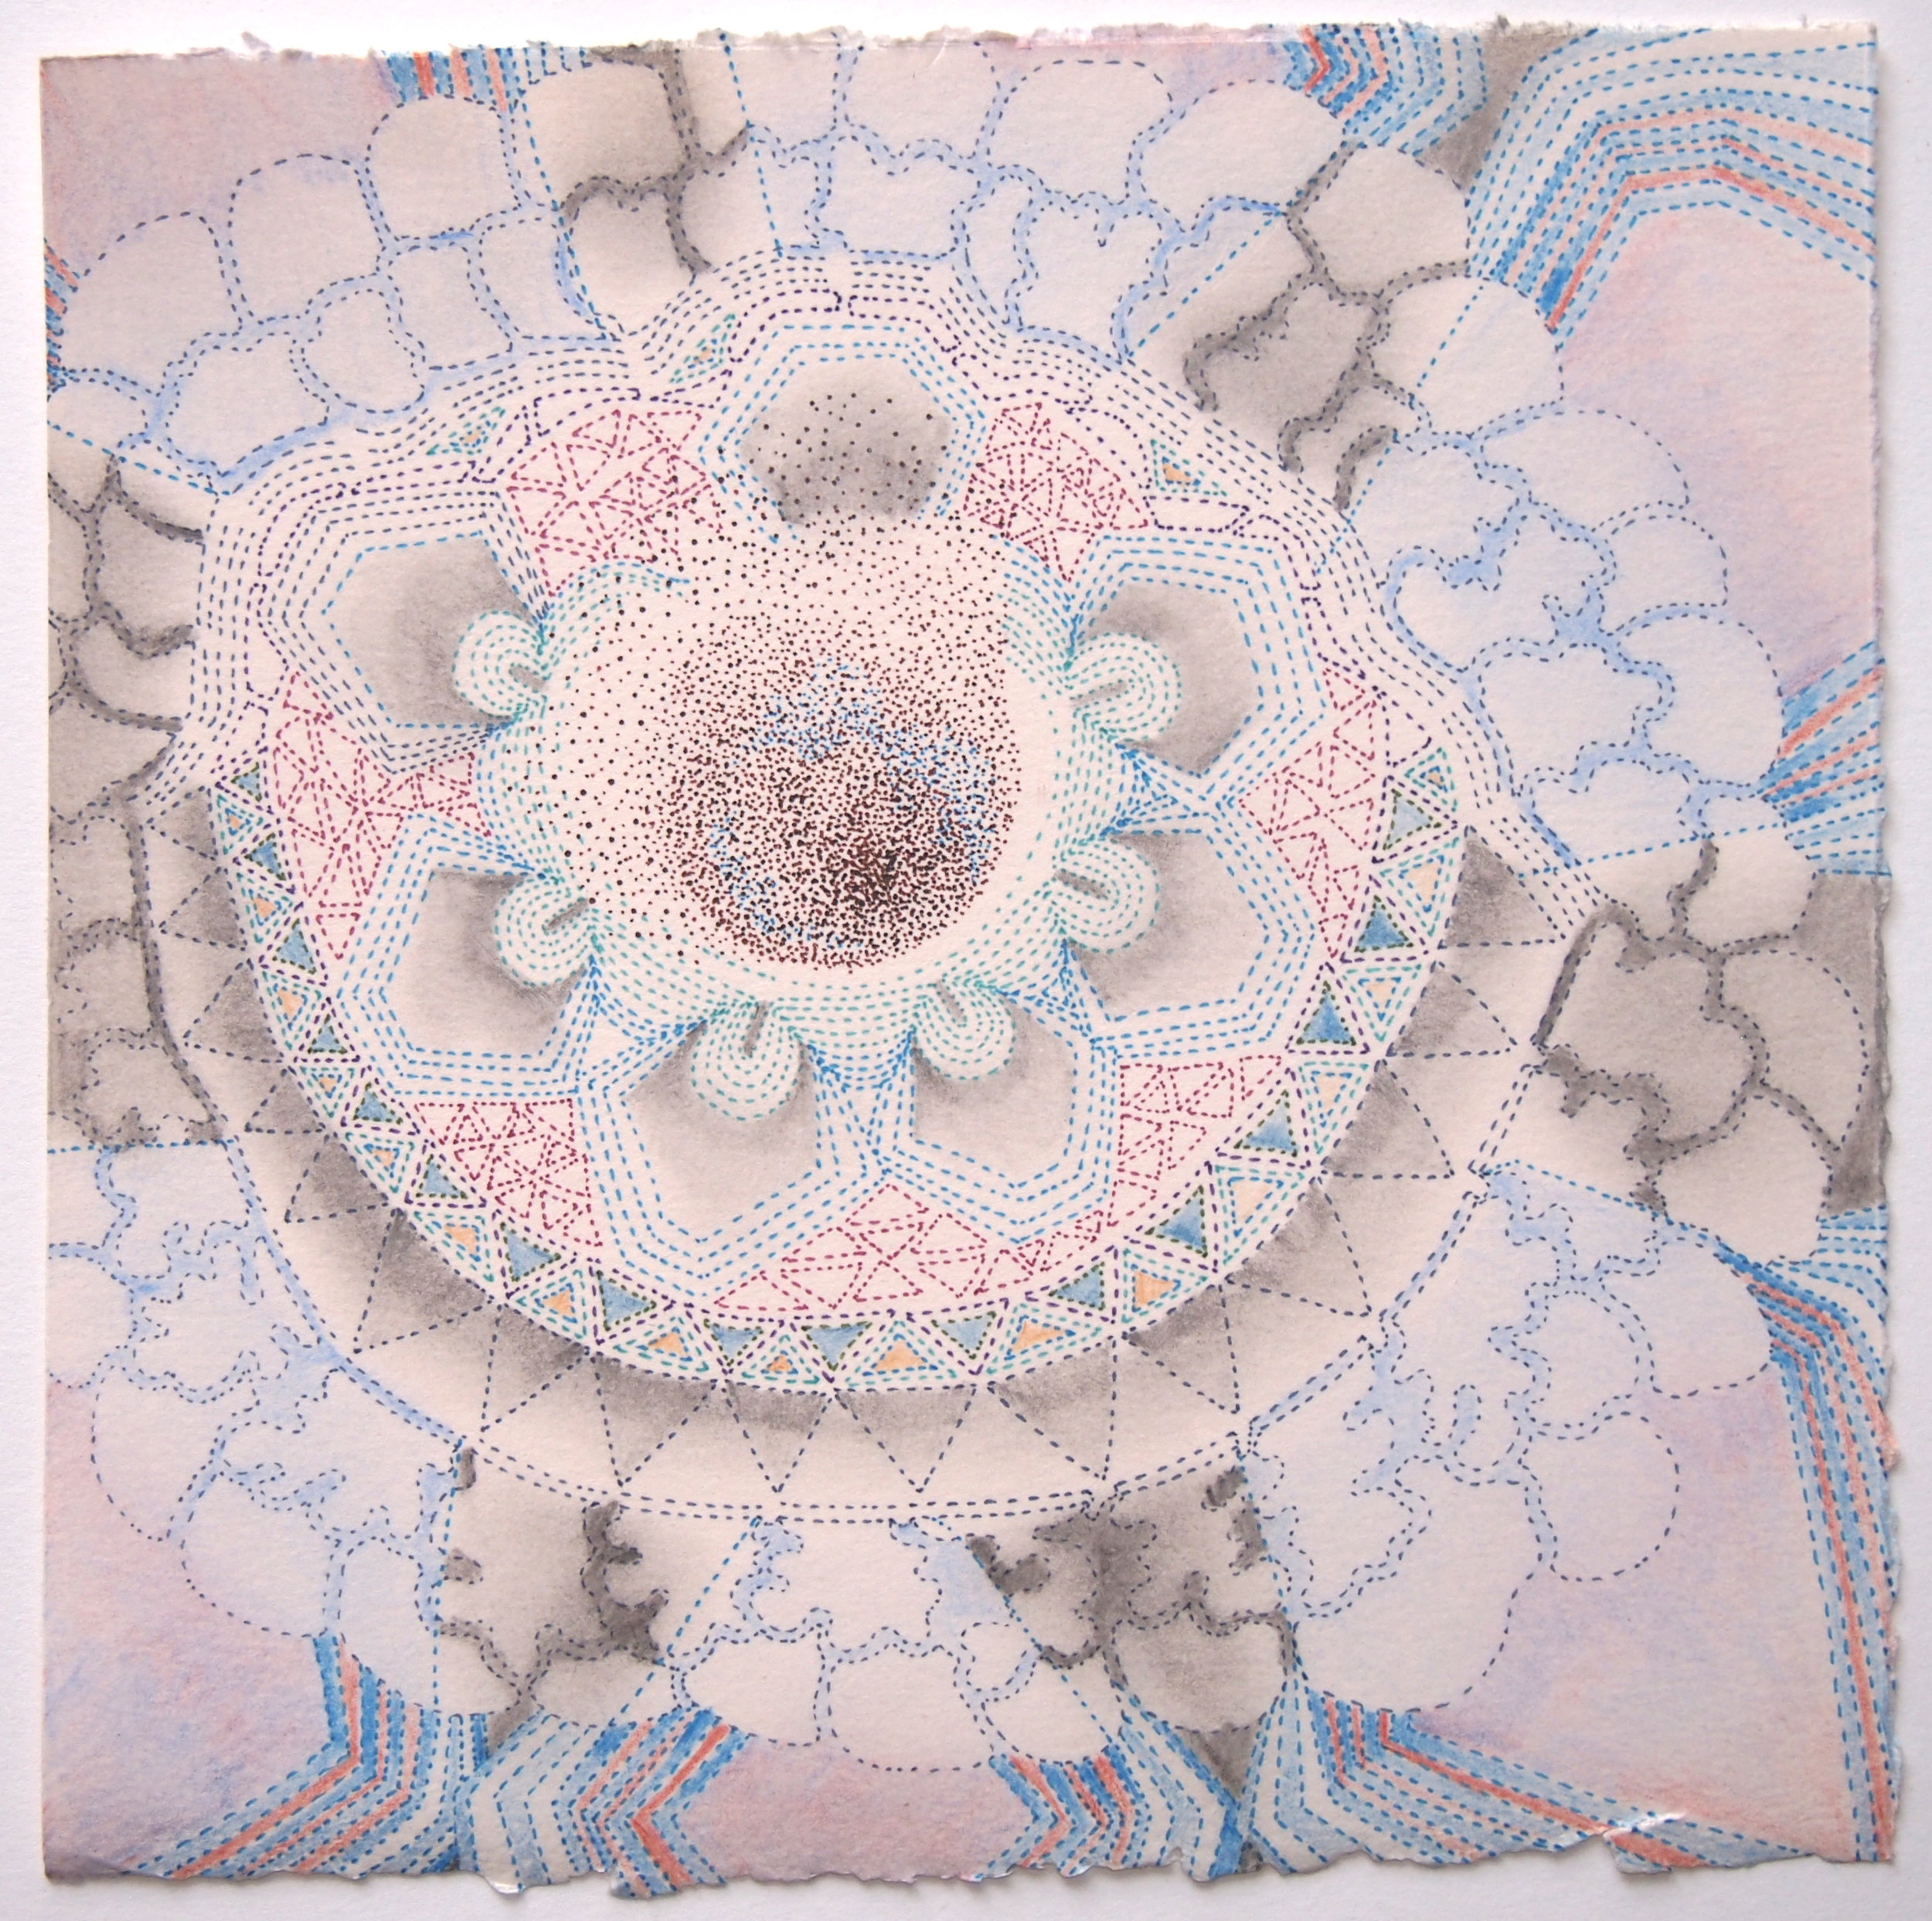 Blue Polypore. Ink, colored pencil and graphite on paper, 7 x 7 inches.